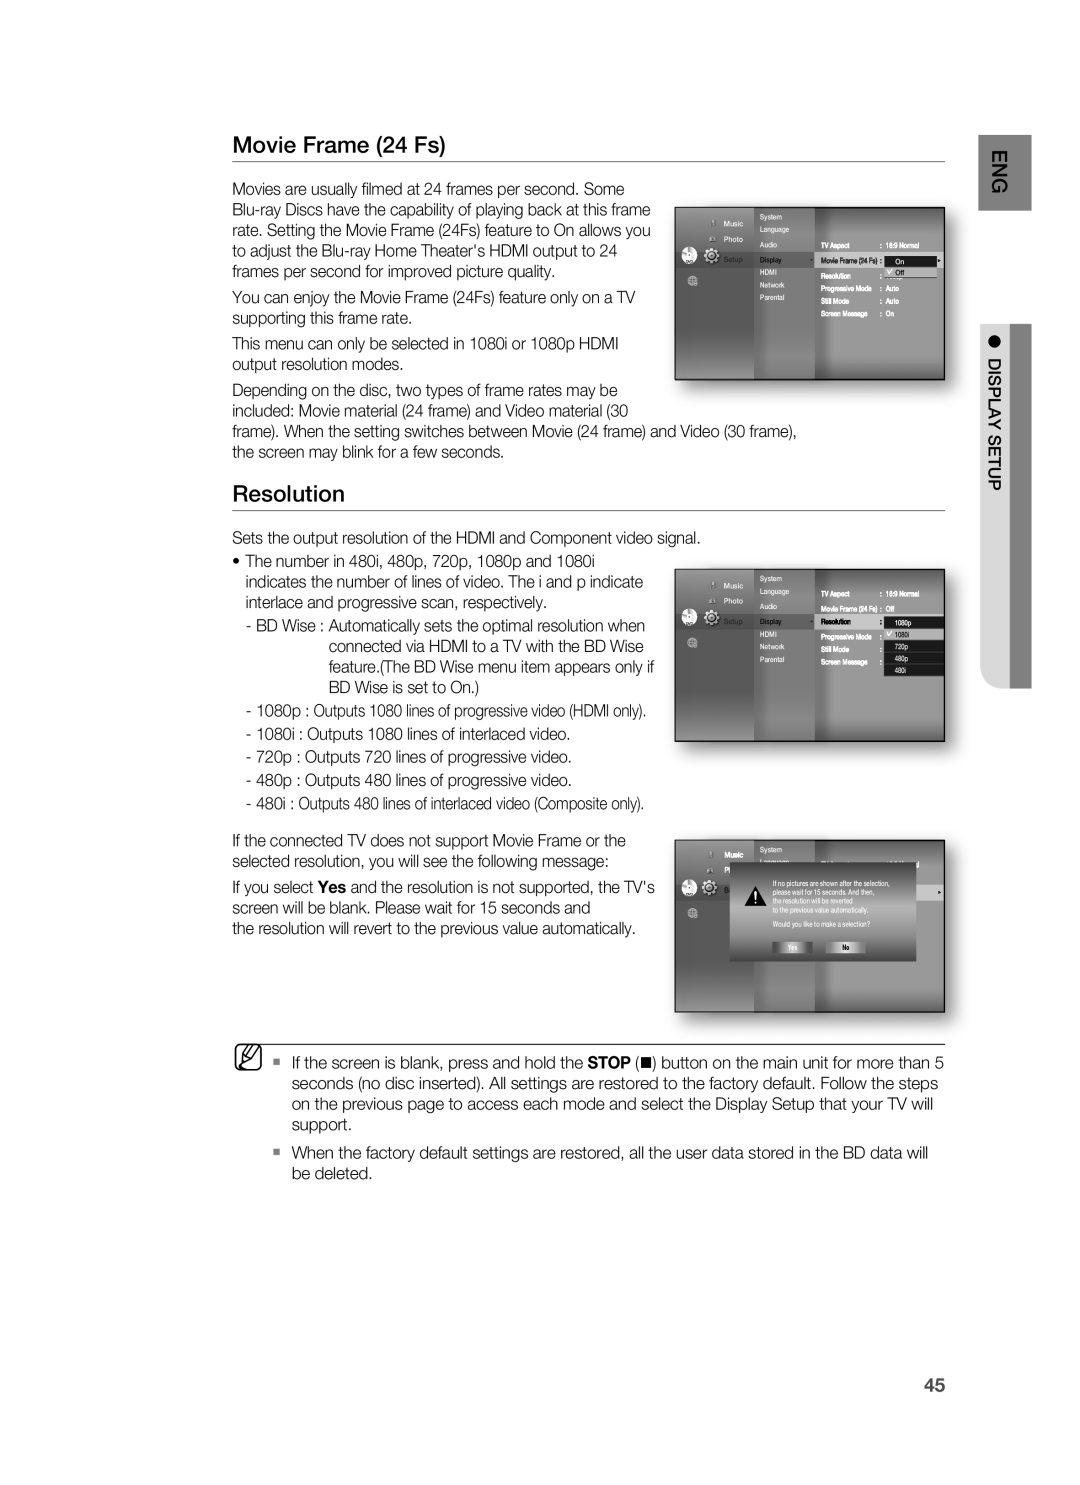 Samsung HT-BD3252 user manual Movie Frame 24 Fs, Resolution, to adjust the Blu-rayHome Theaters HDMI output to 